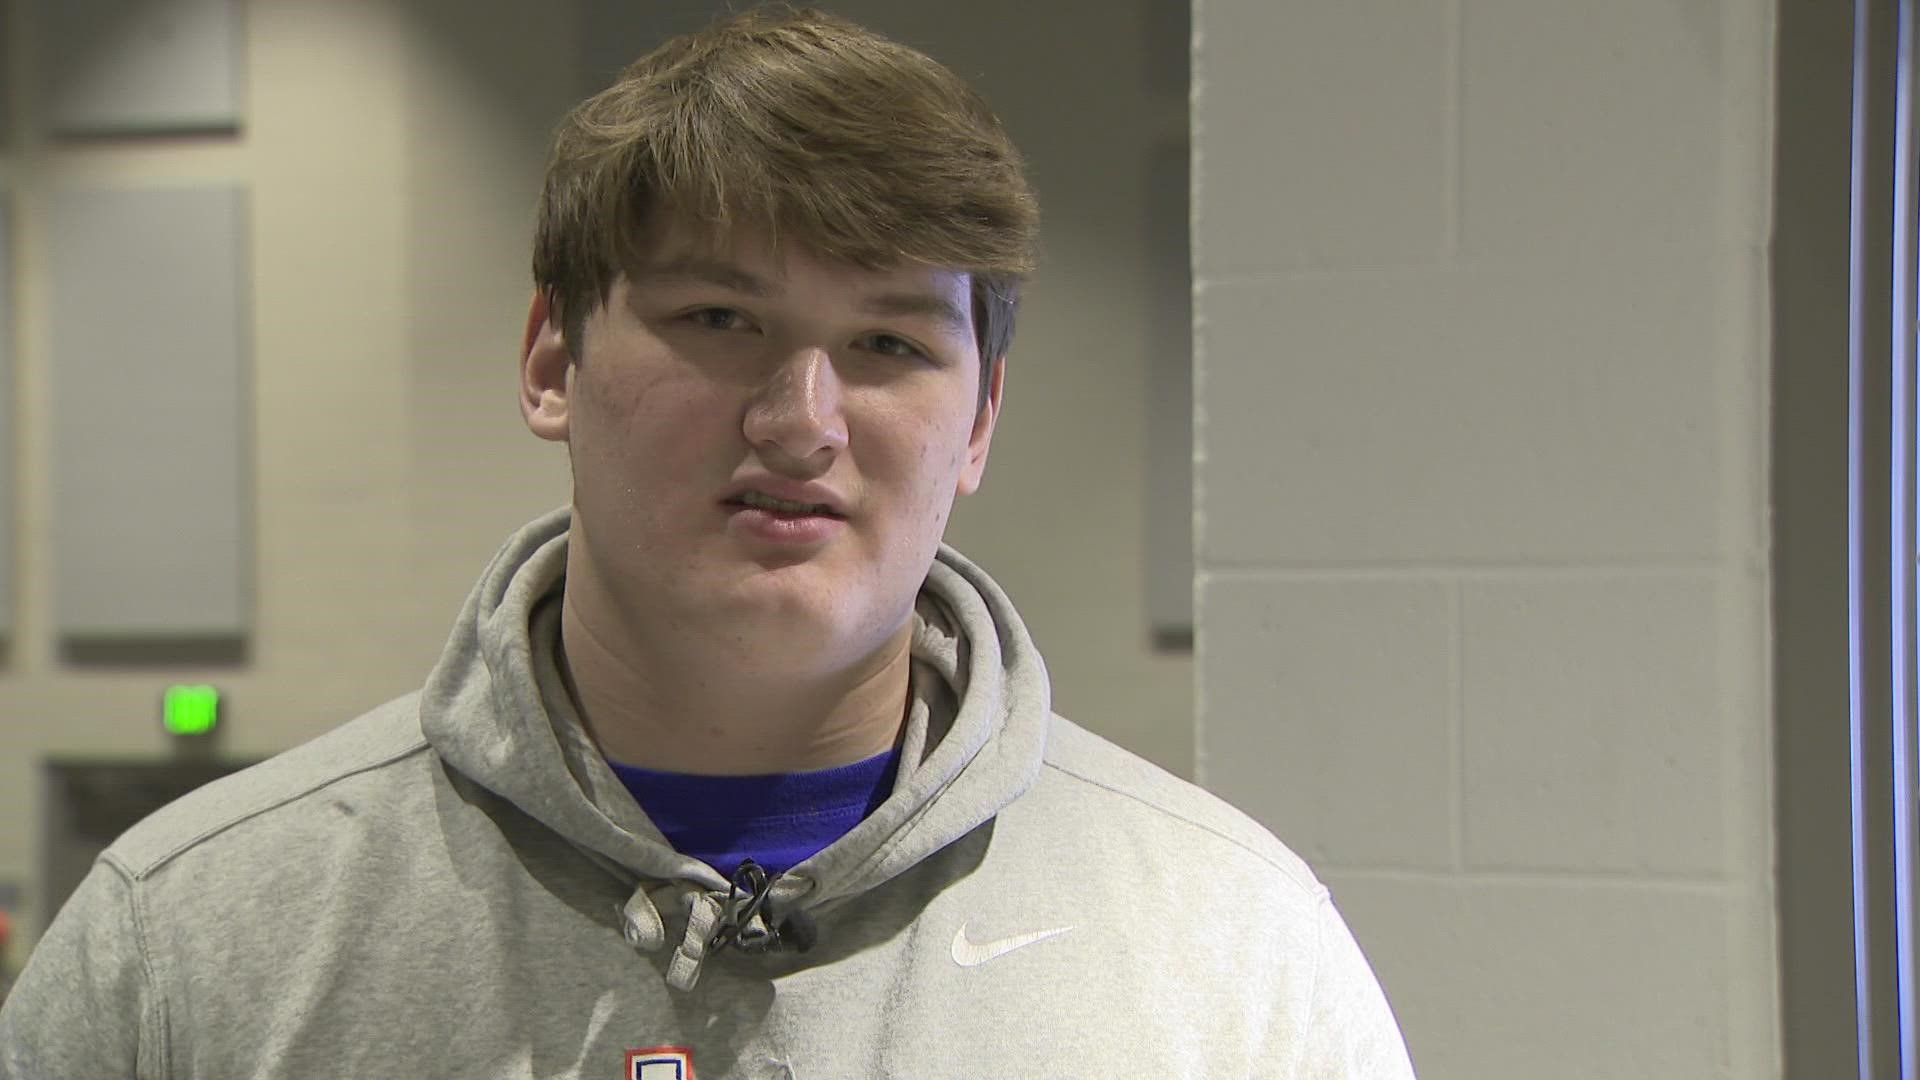 Owyhee High School senior Carson Rasmussen will play for the Boise State University football team as an offensive lineman beginning fall 2023.